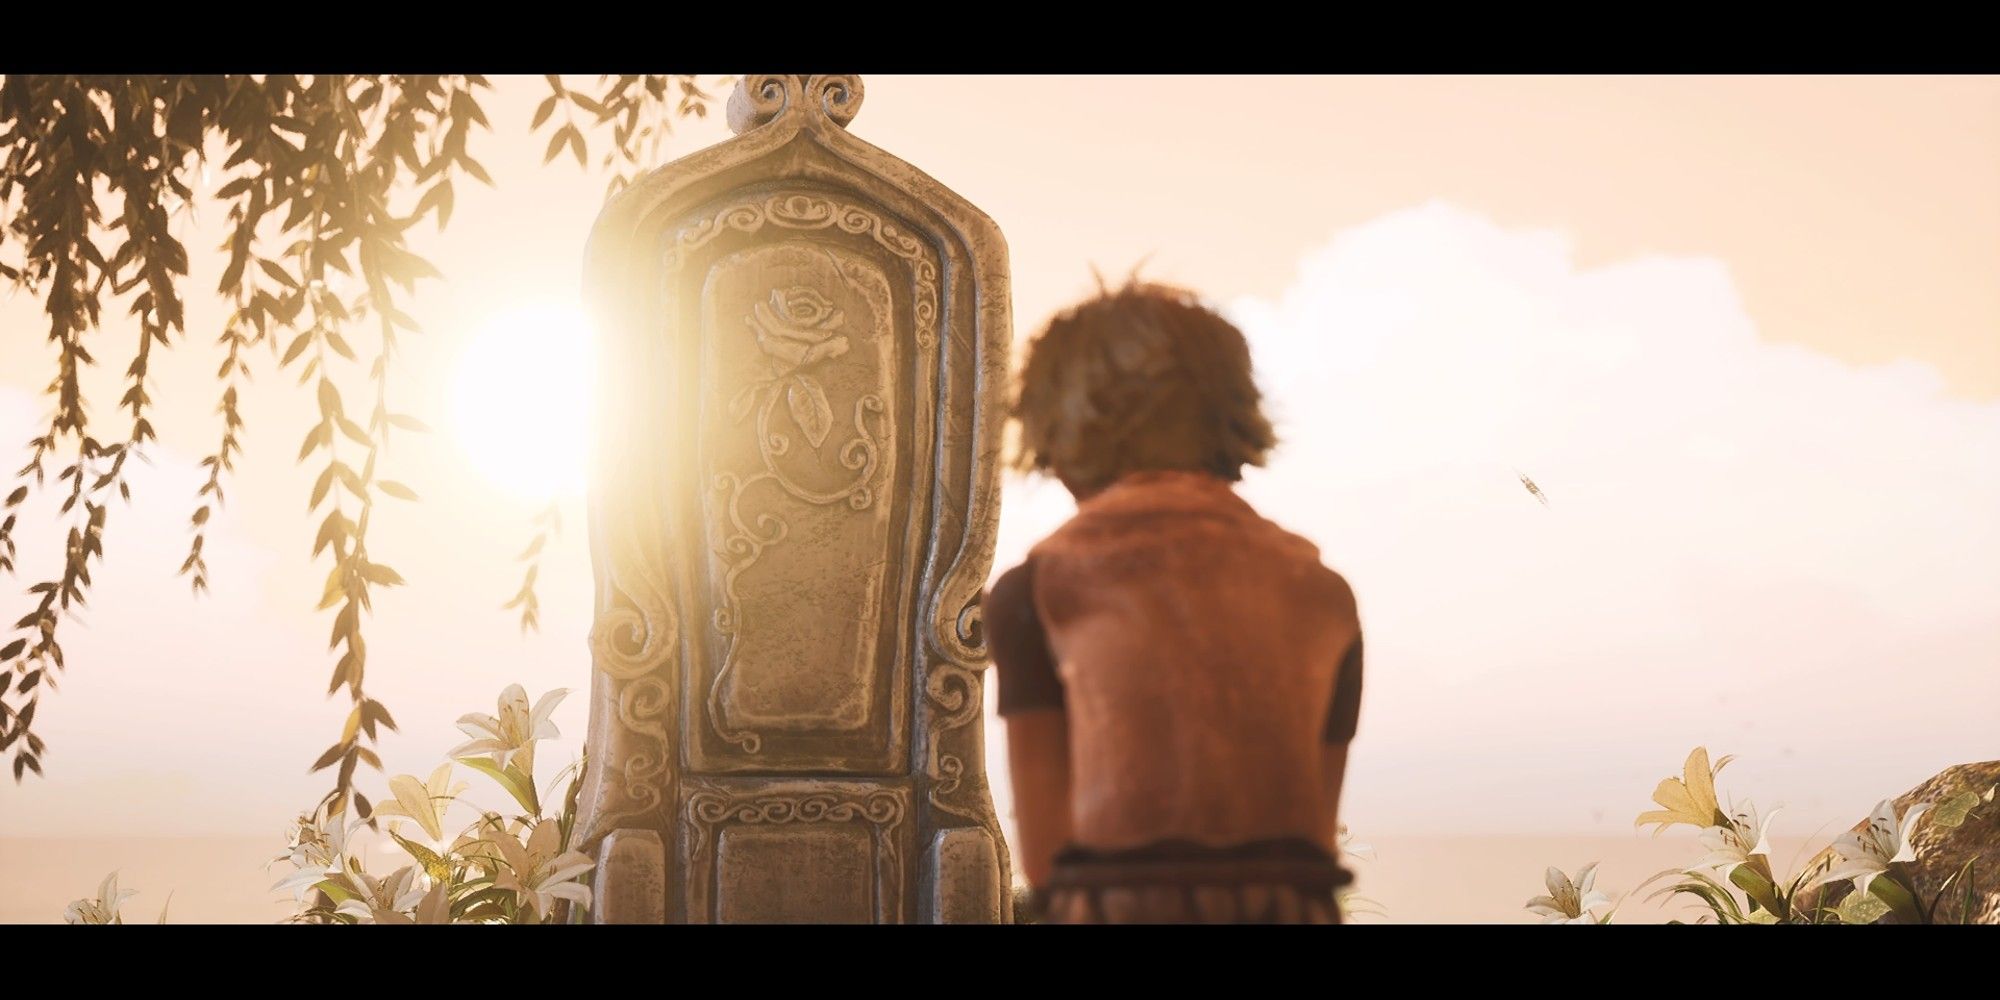 Naiee at his mother's grave in Brothers A Tale of Two Sons Remake